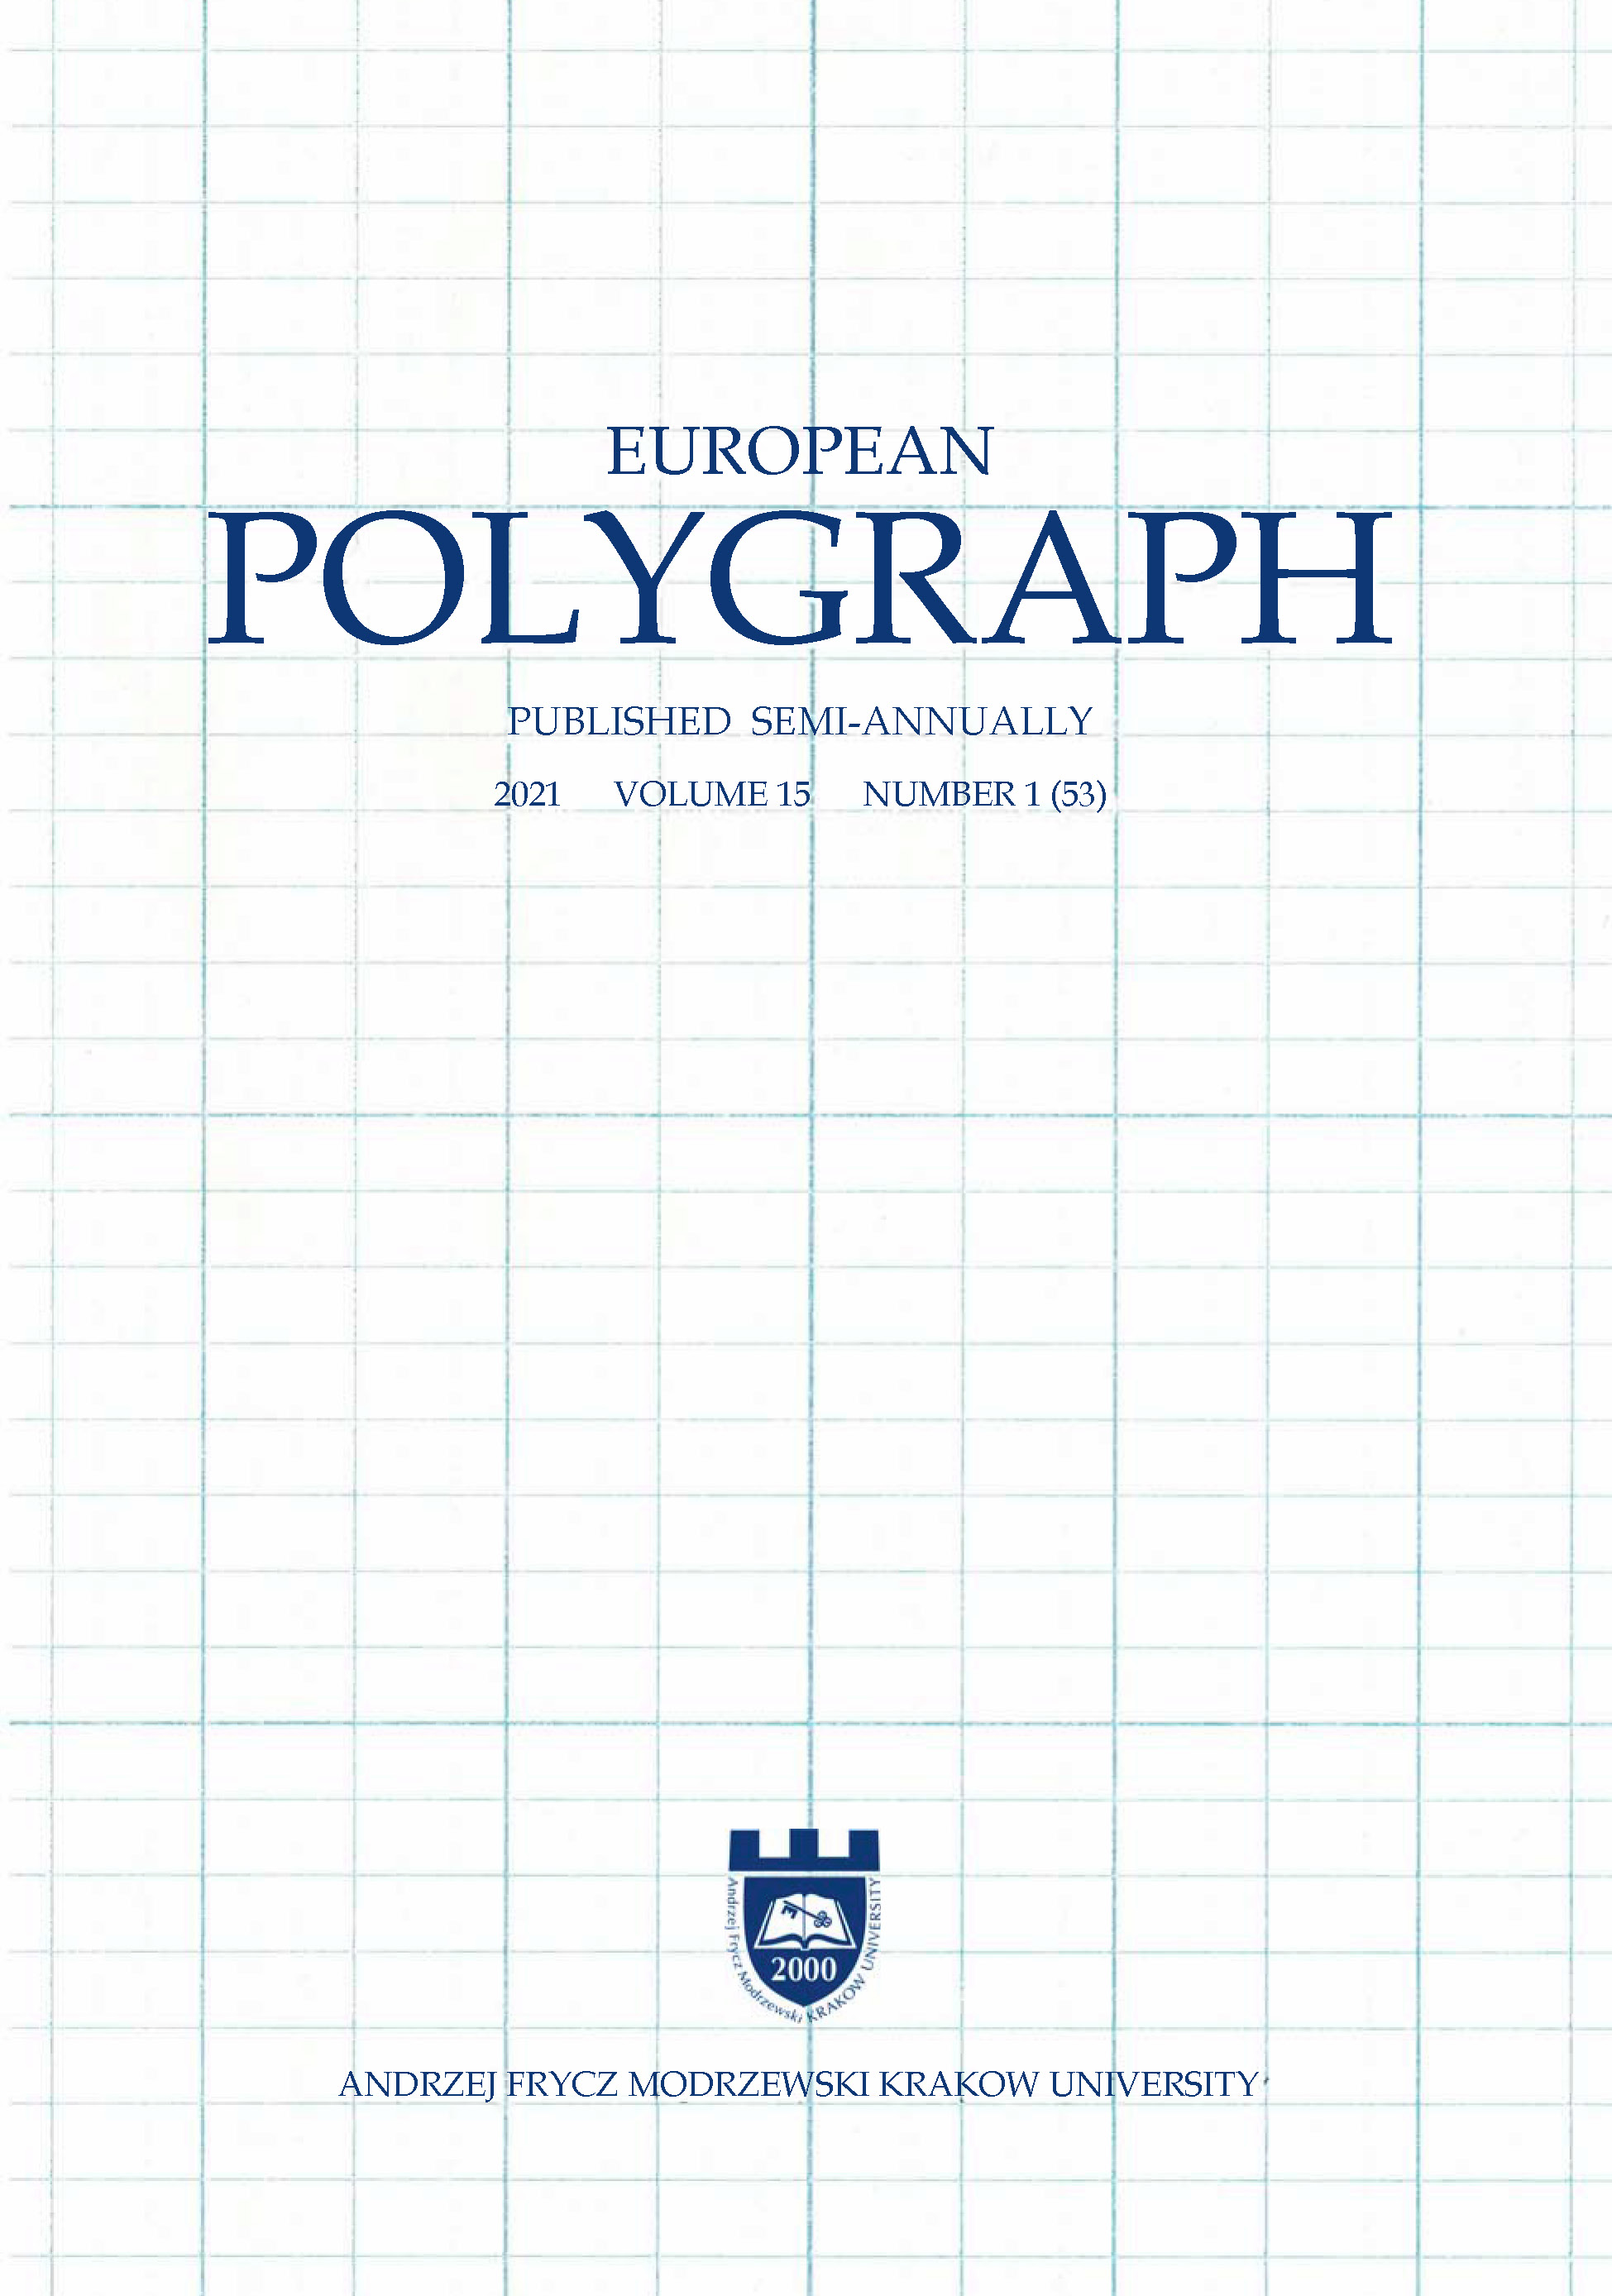 Evidence Based Practice Integration into Polygraph Practice: A suggested paradigm Cover Image